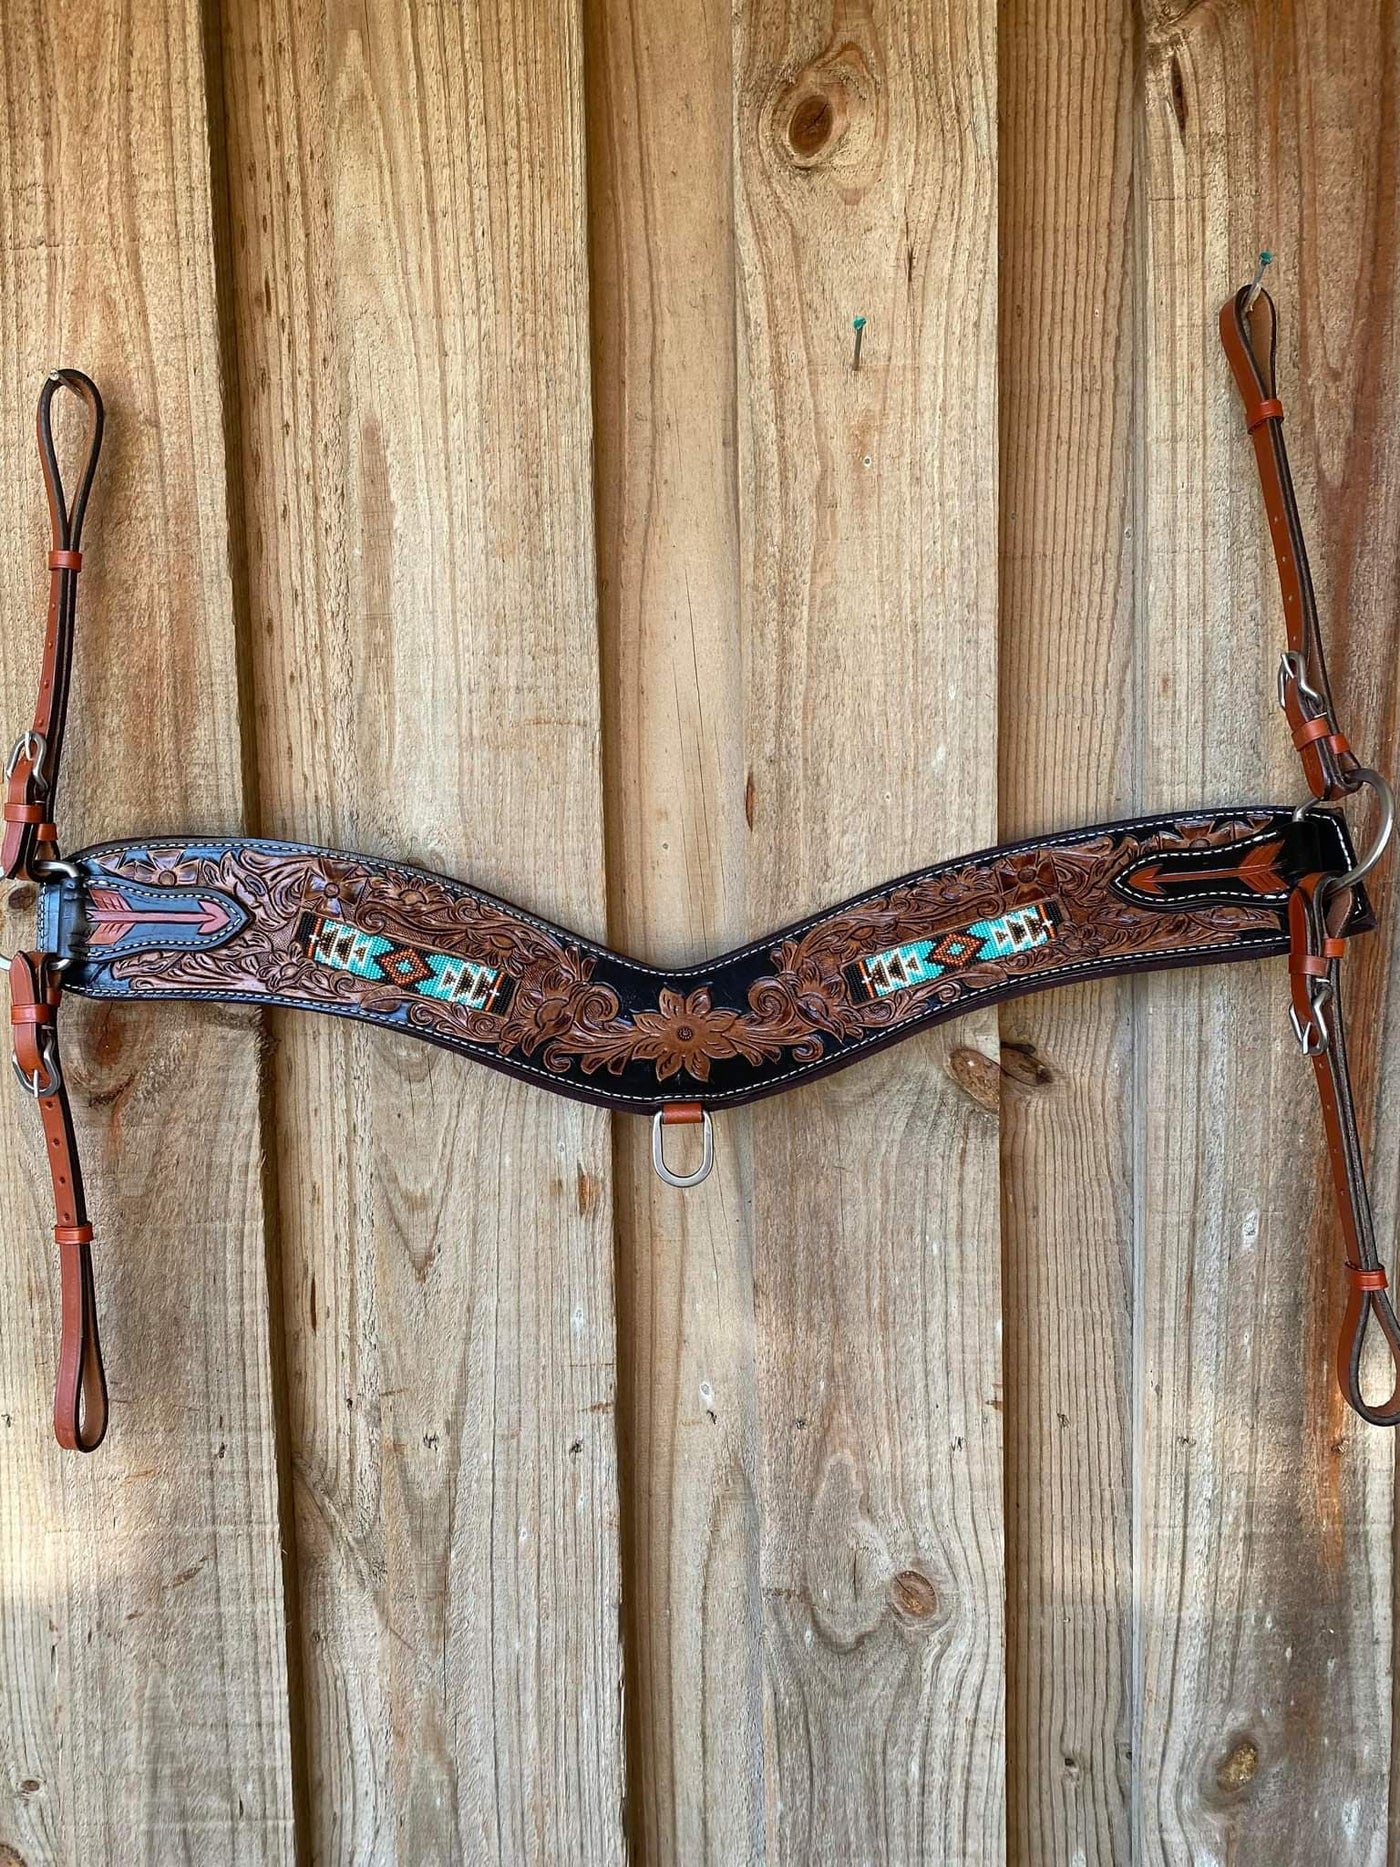 Breastcollar - Western Tripping Breastplate with Tooling and Beaded Inlay